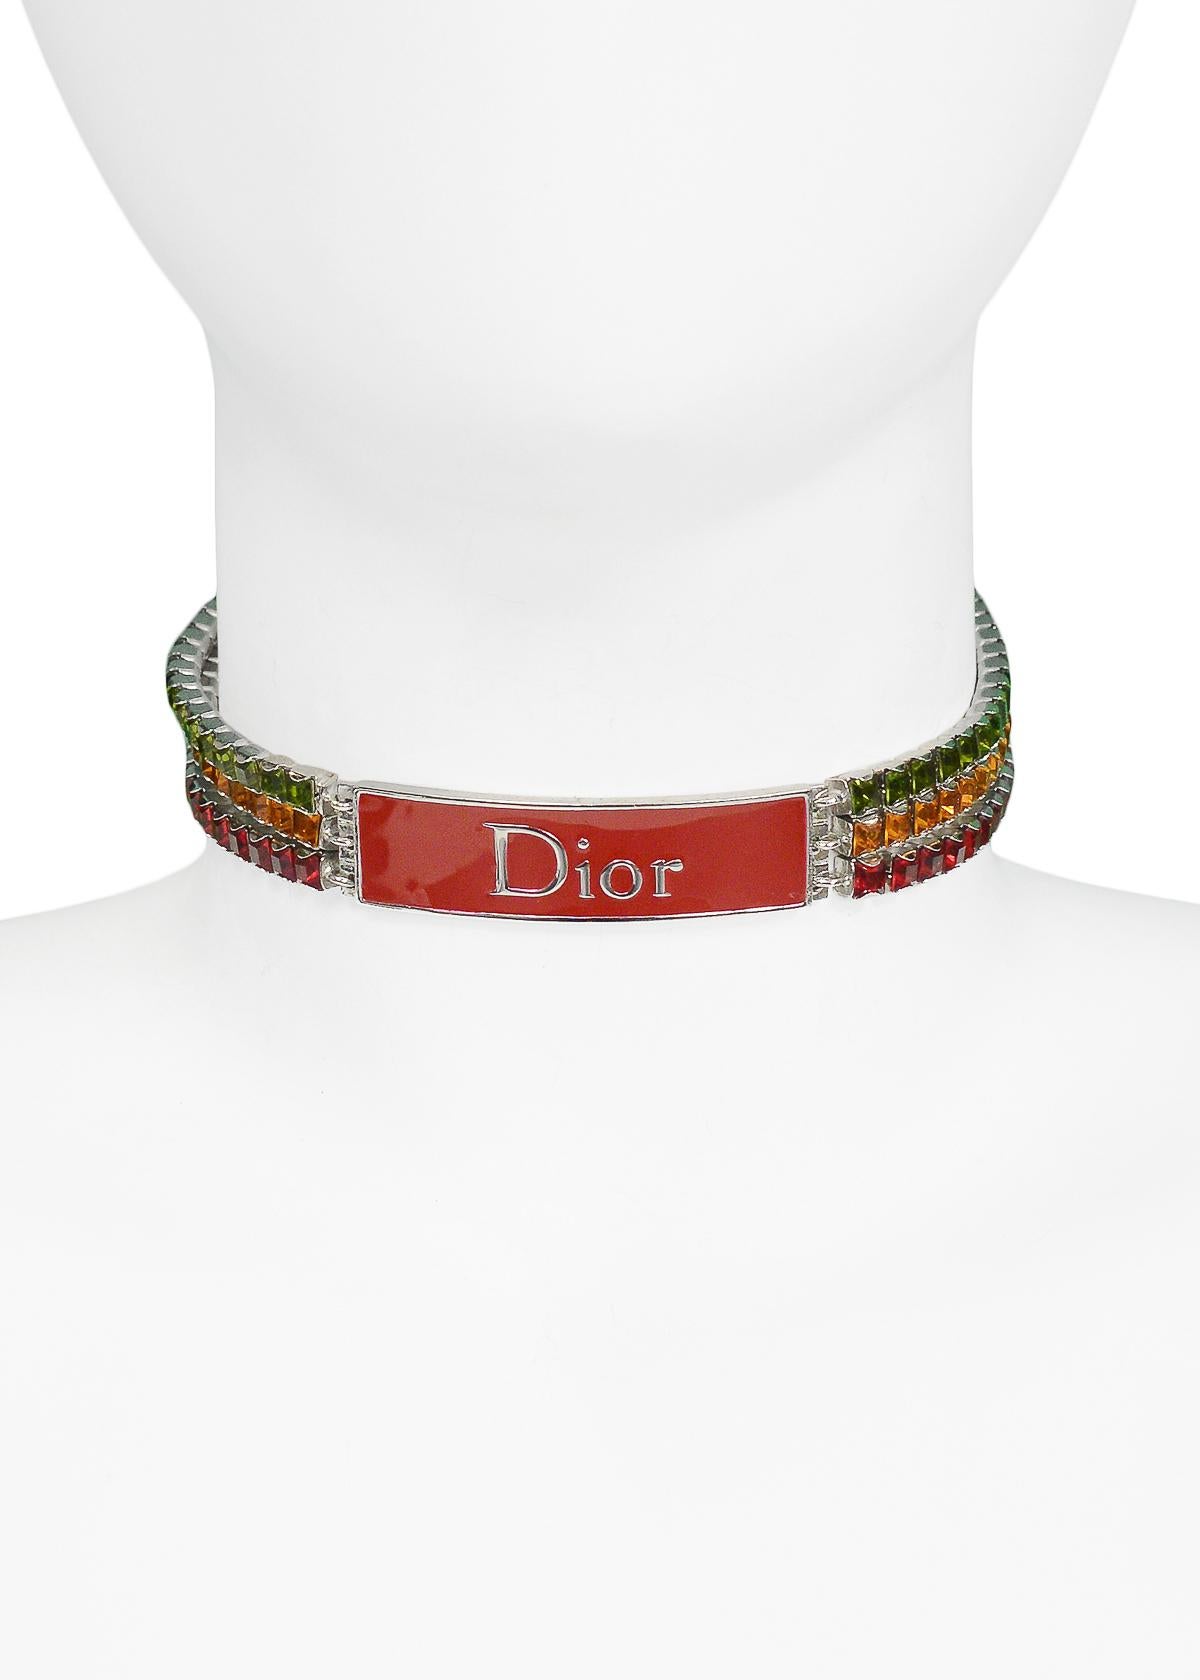 Vintage Christian Dior red, orange, and green rhinestone Rasta-style choker with red enamel Dior logo plate and hook closure.

Excellent Vintage Condition.